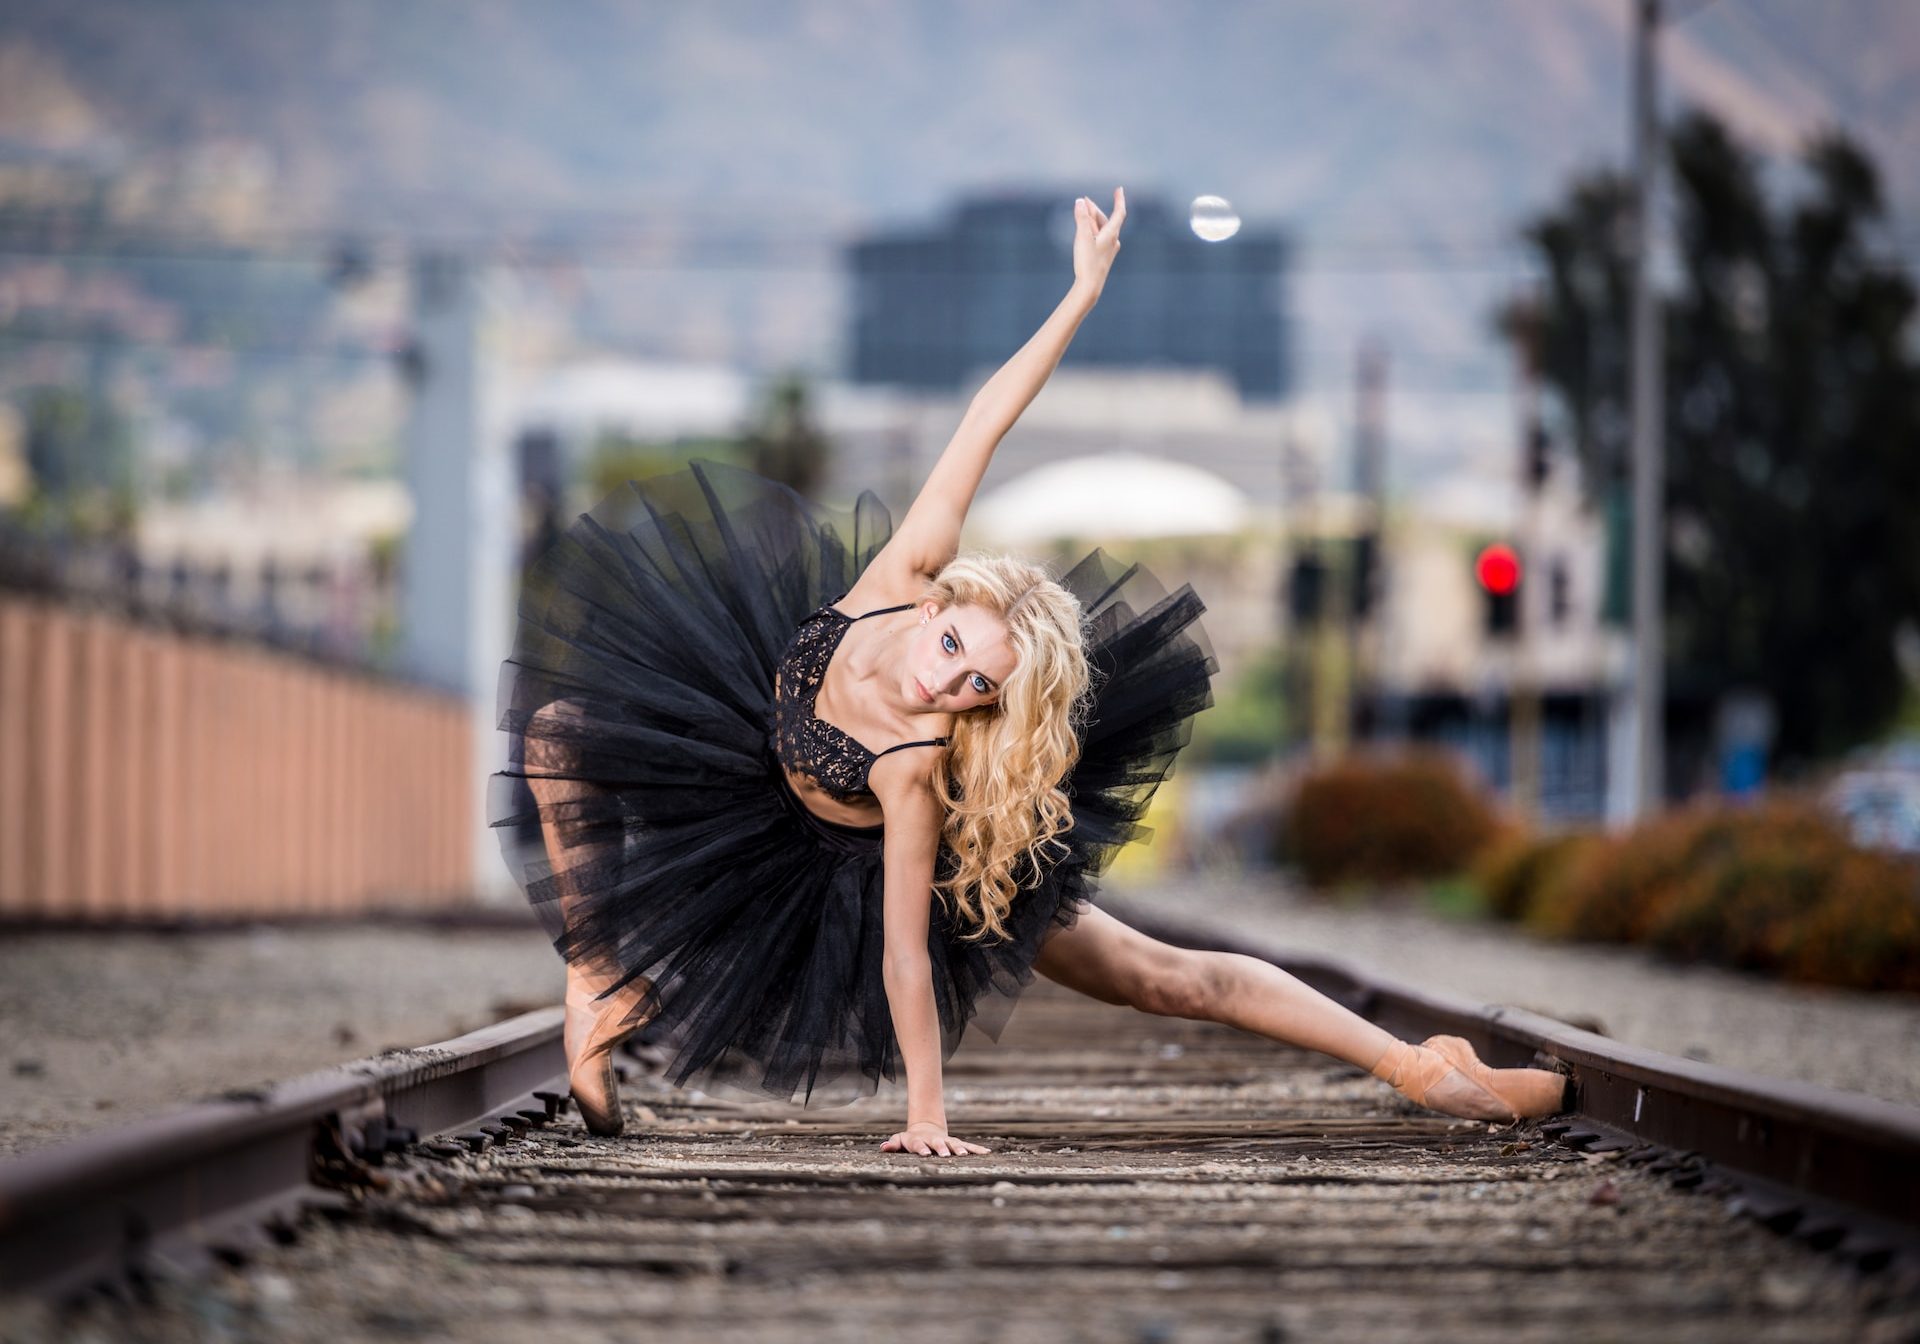 A young woman in a black tutu is posing on railroad tracks.